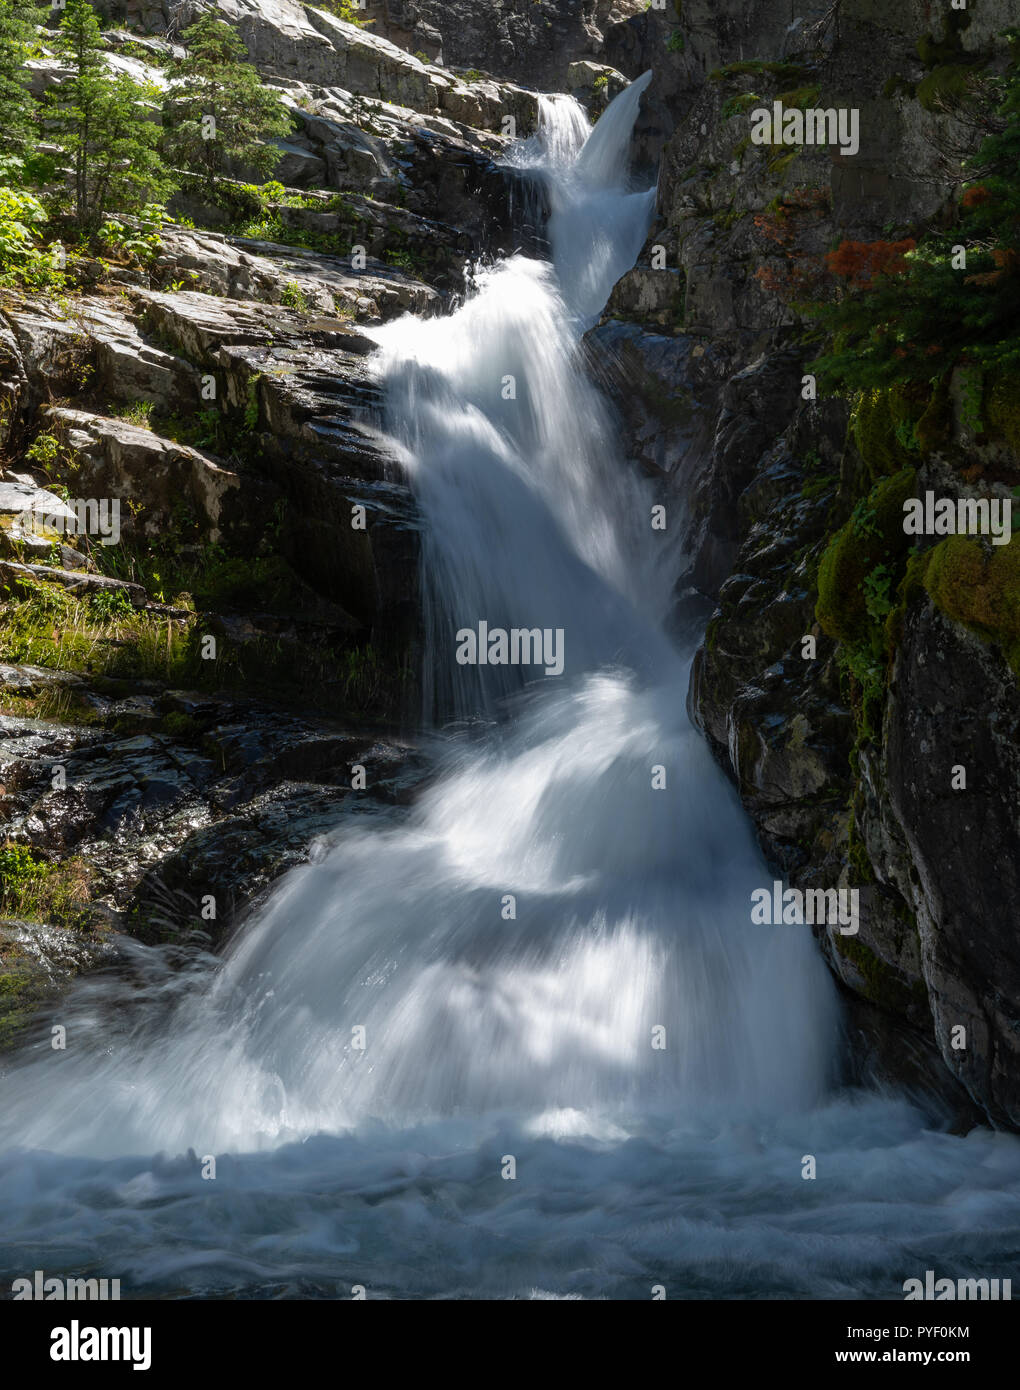 Aster Falls Rushing With Water in afternoon light Stock Photo